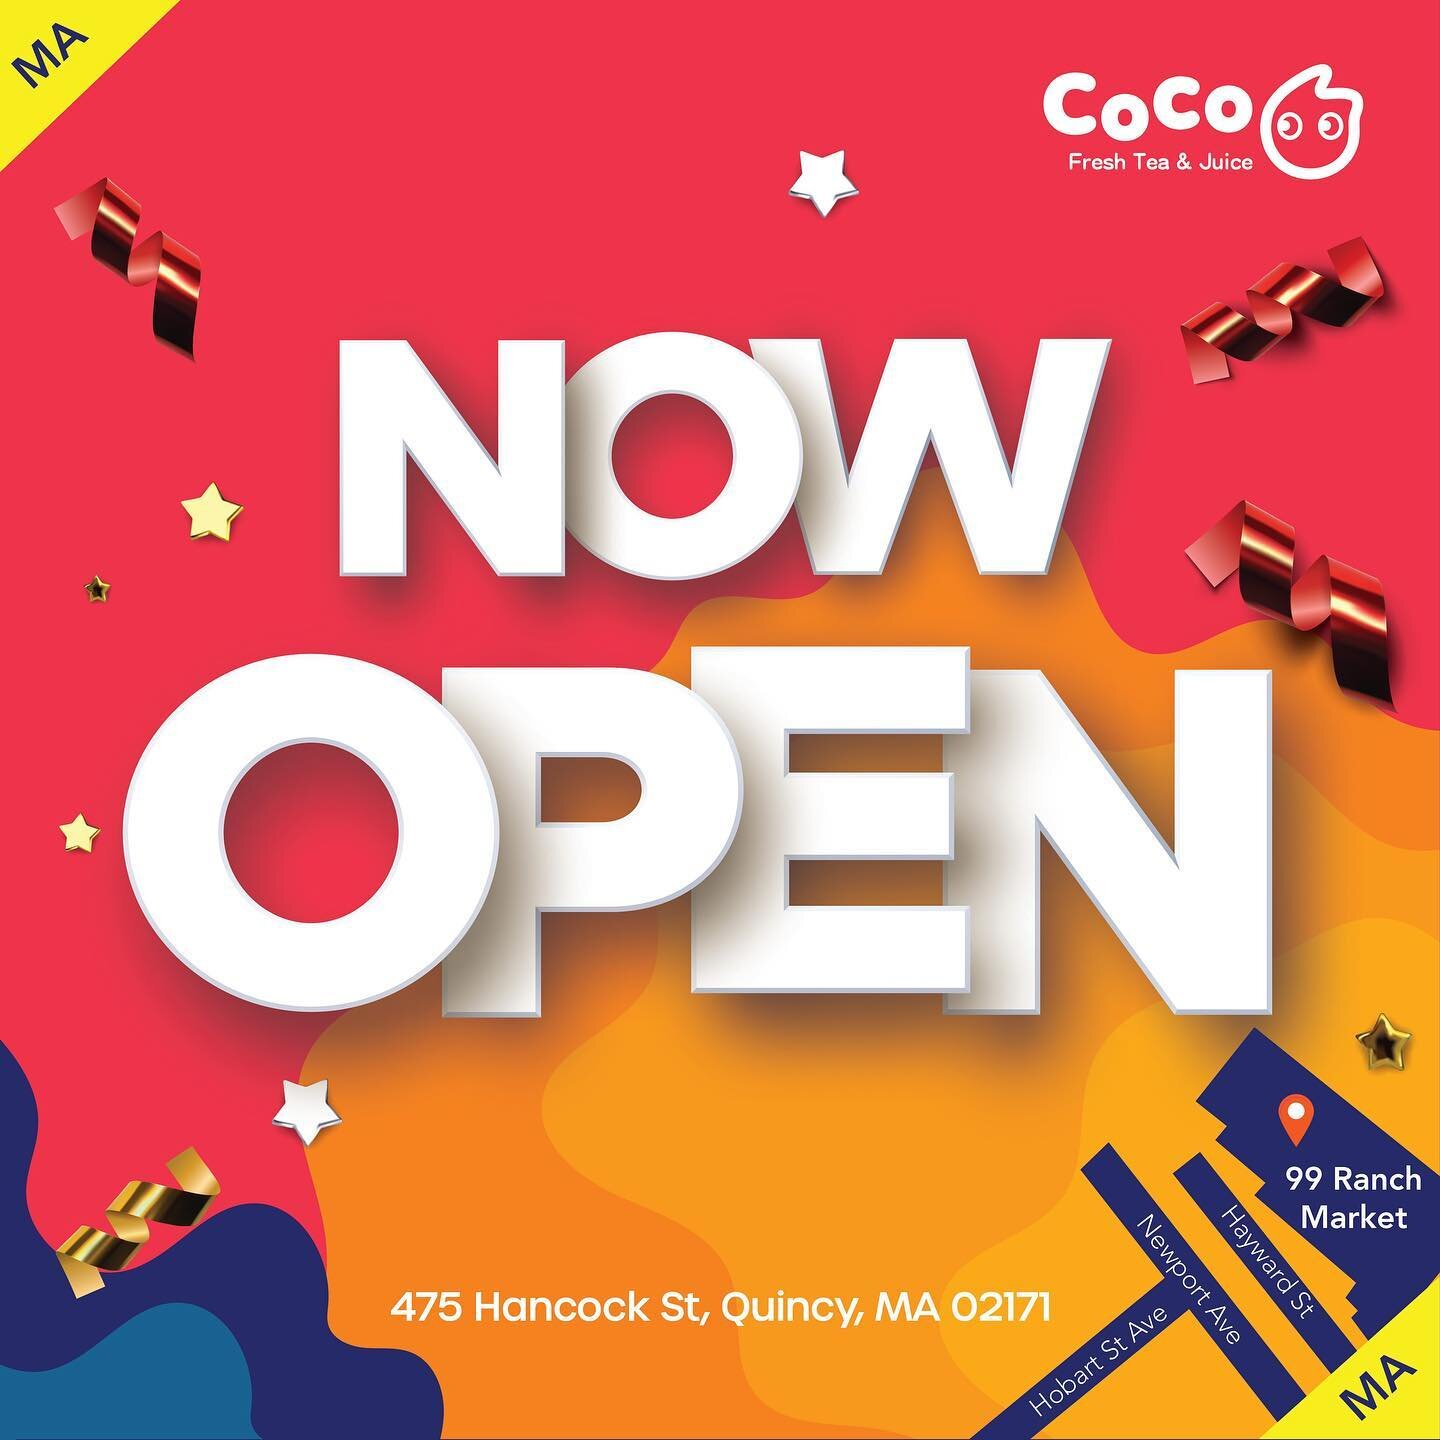 We have officially opened our first CoCo store in Massachusetts! 🧋🎉⠀
⠀
📍 475 Hancock St, Quincy, MA 02171⠀
⠀
#cocofreshteaandjuice #grandopening #massachusetts #massfoodies #masseats #quincy #quincyfood #quincyma #99ranchmarket #boba #bobashop #bu